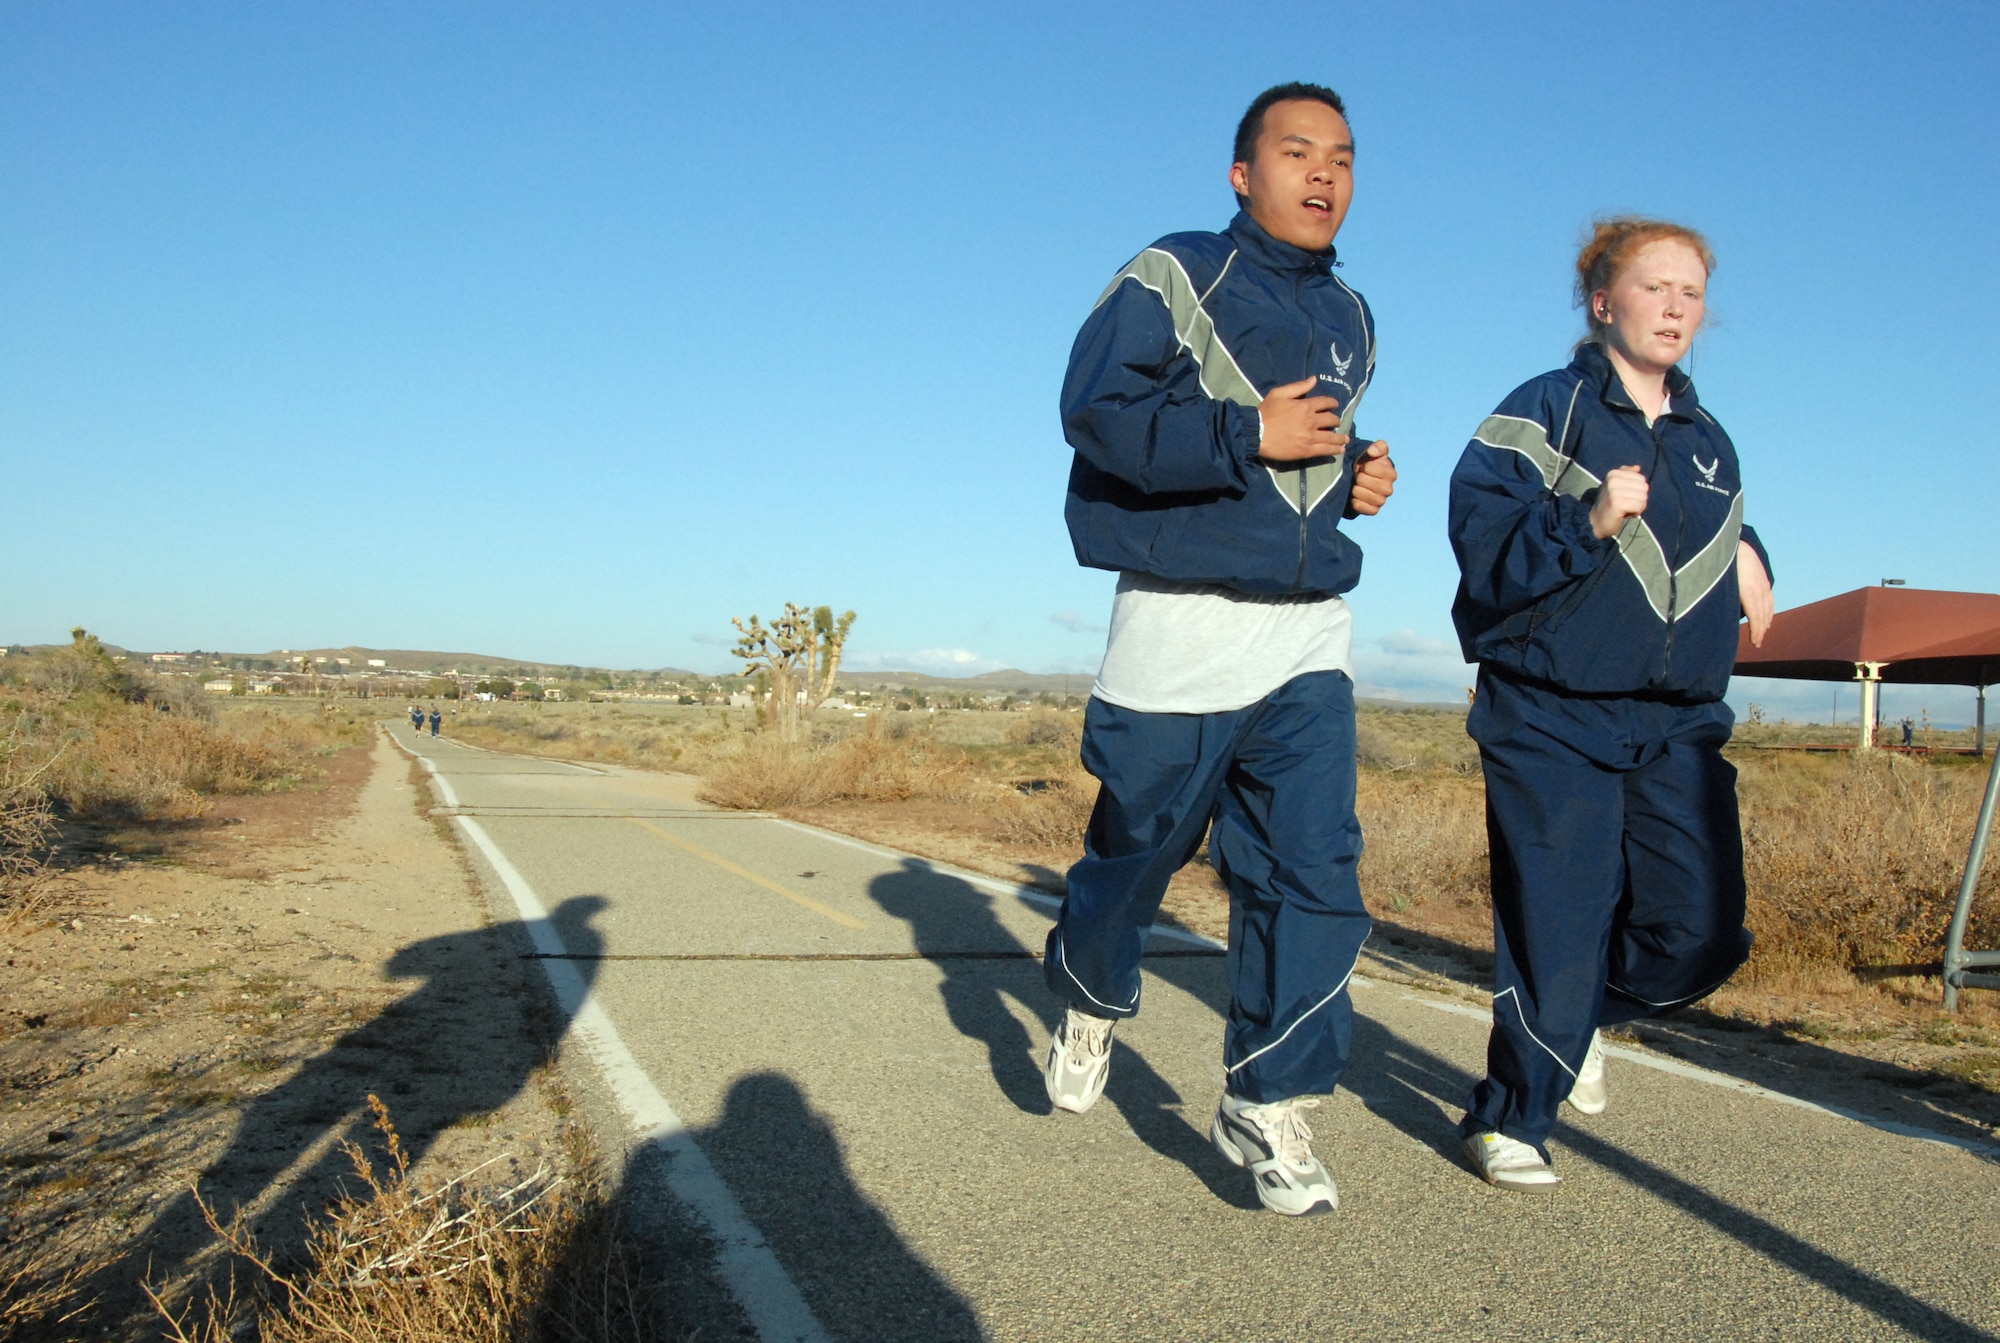 Airman 1st Class Jose Aurellano and Airman Lauren Birk, both from the 95th Force Support Squadron, run at the Rosburg Fitness Center track as part of their squadron physical training. (U.S. Air Force photo/Senior Airman Julius Delos Reyes)